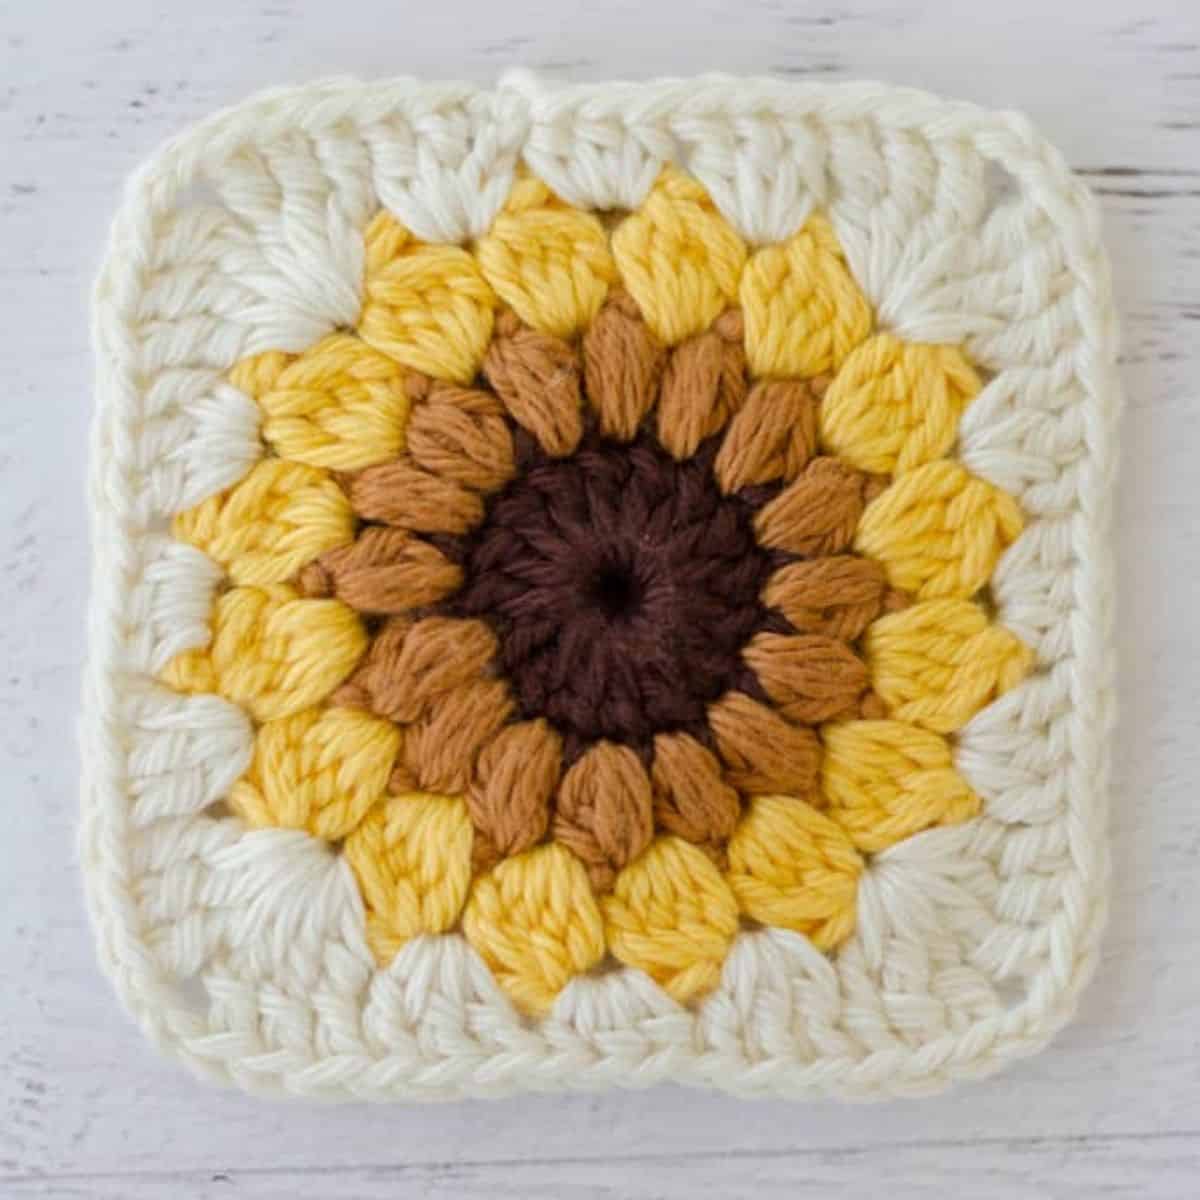 crochet granny square with a sunflower motif in the middle